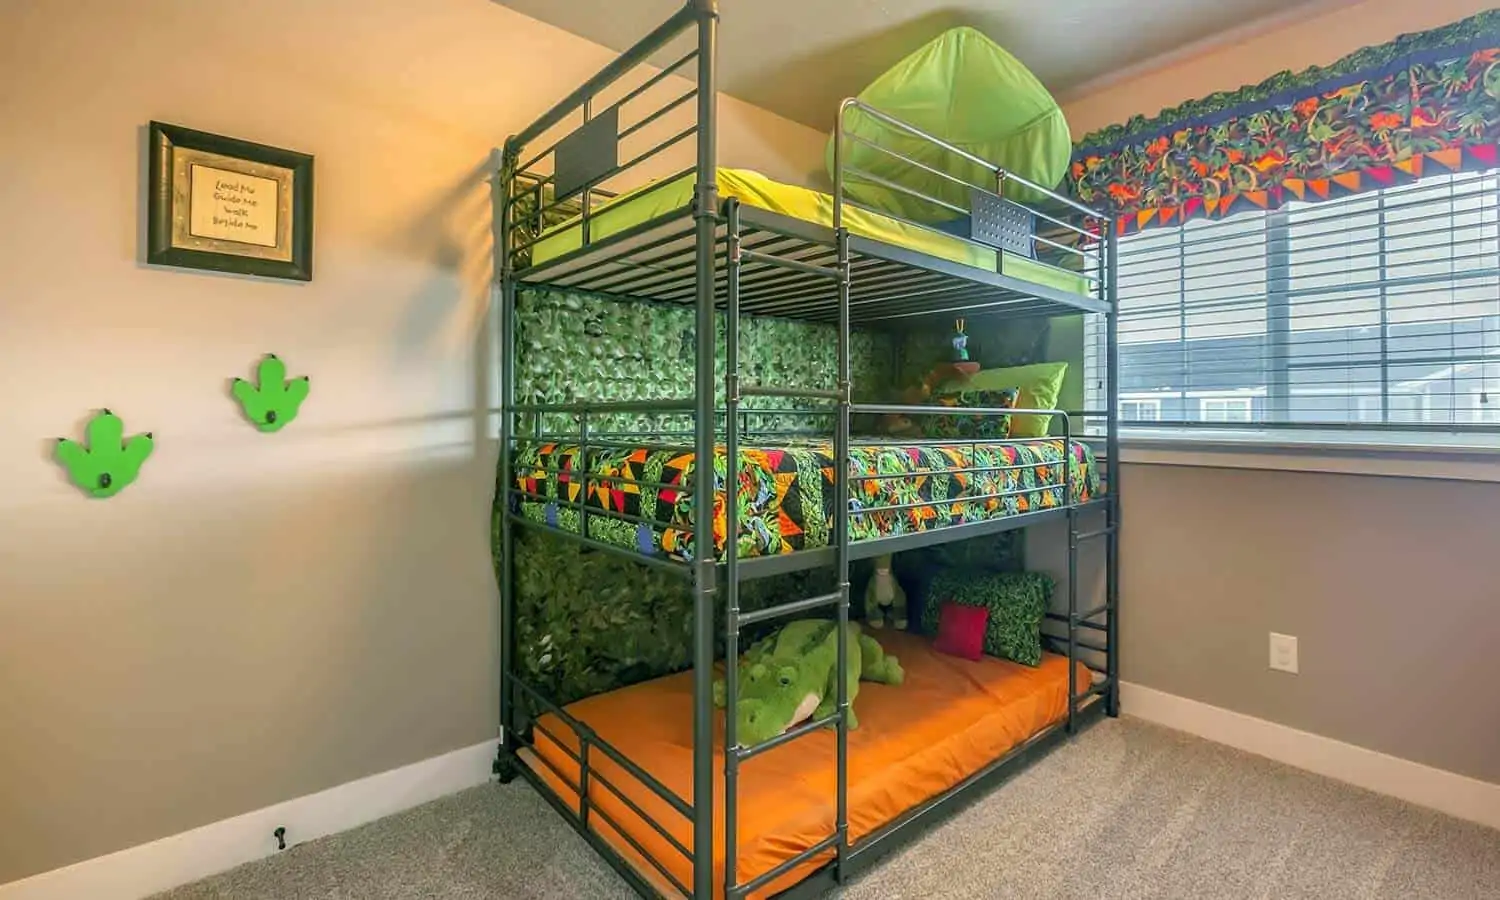  triple bunk bed similar to futon in space efficiency